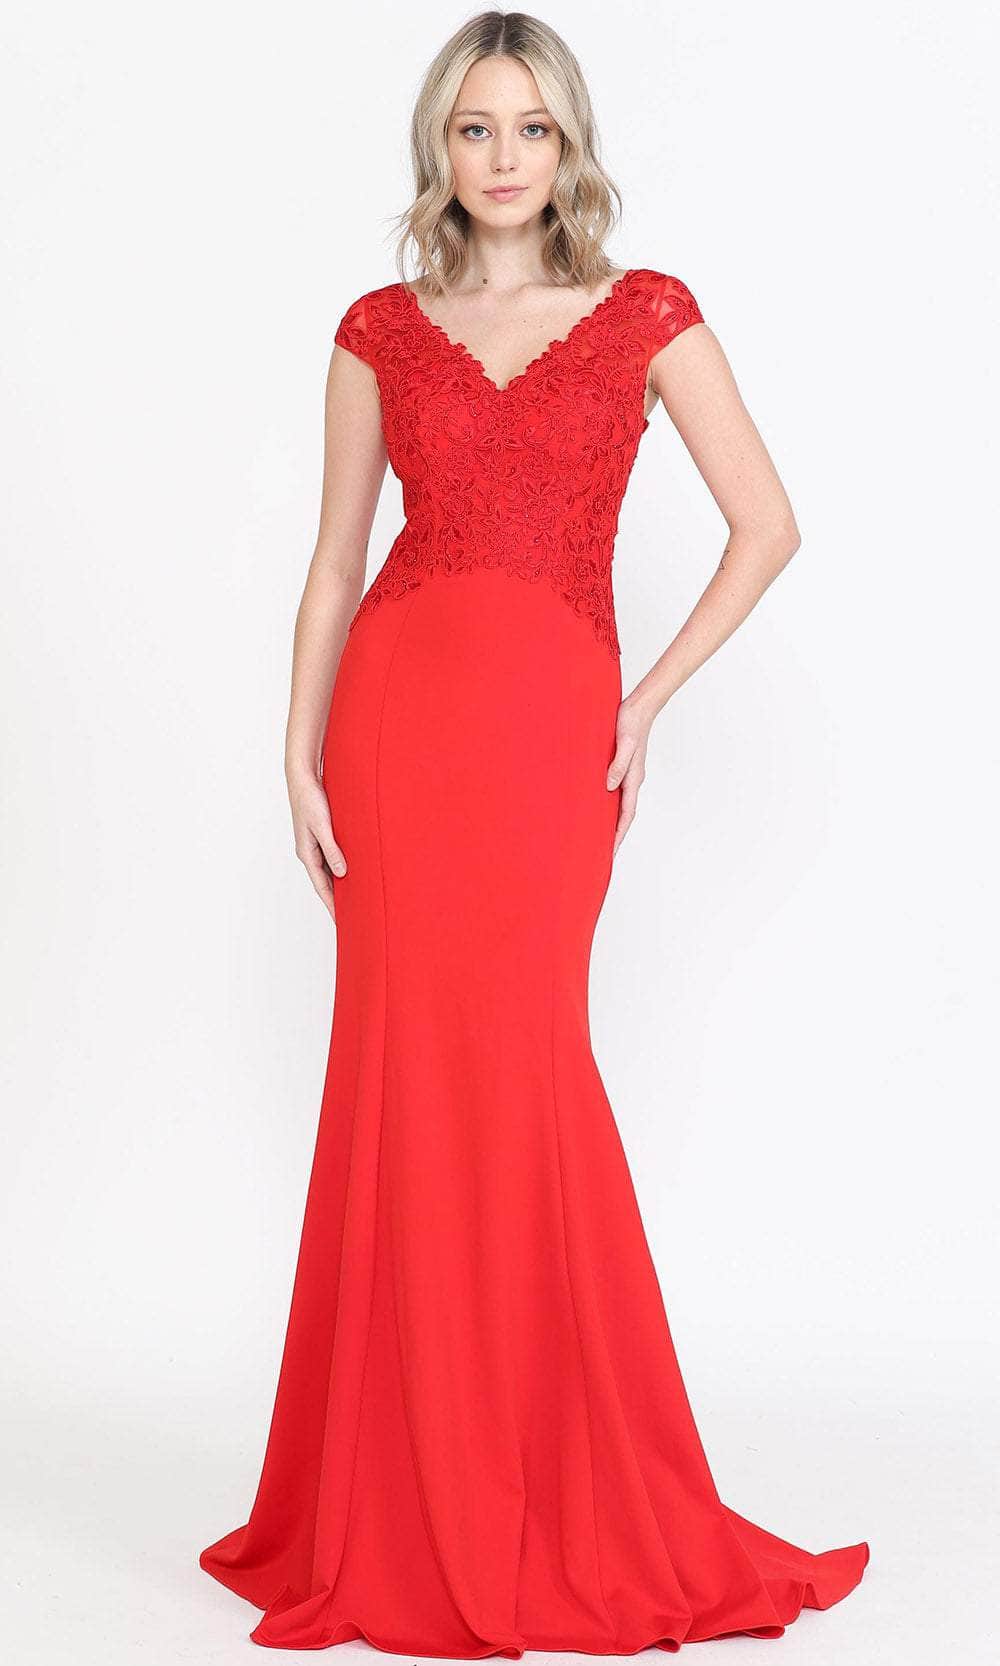 Image of Poly USA 8558 - Embroidered Jersey V-Neck Evening Dress